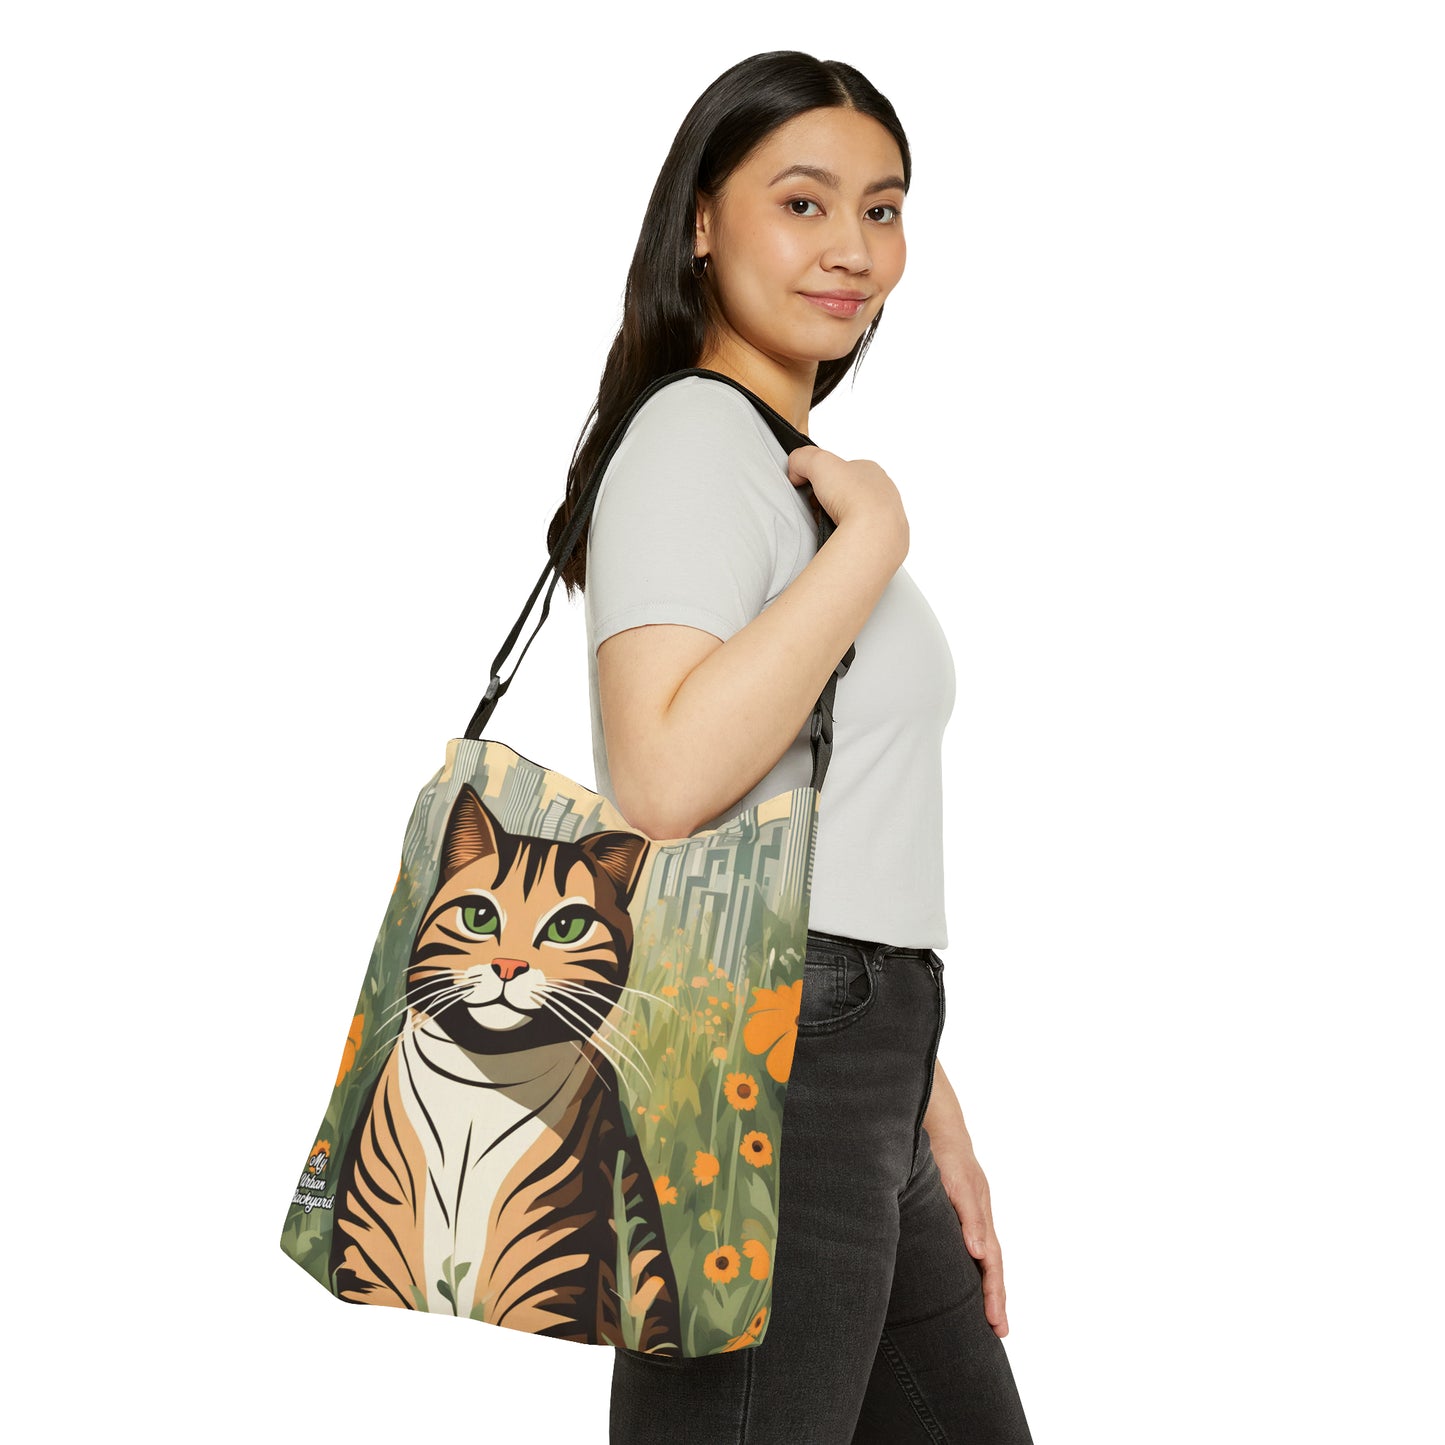 City Tabby, Tote Bag with Adjustable Strap - Trendy and Versatile